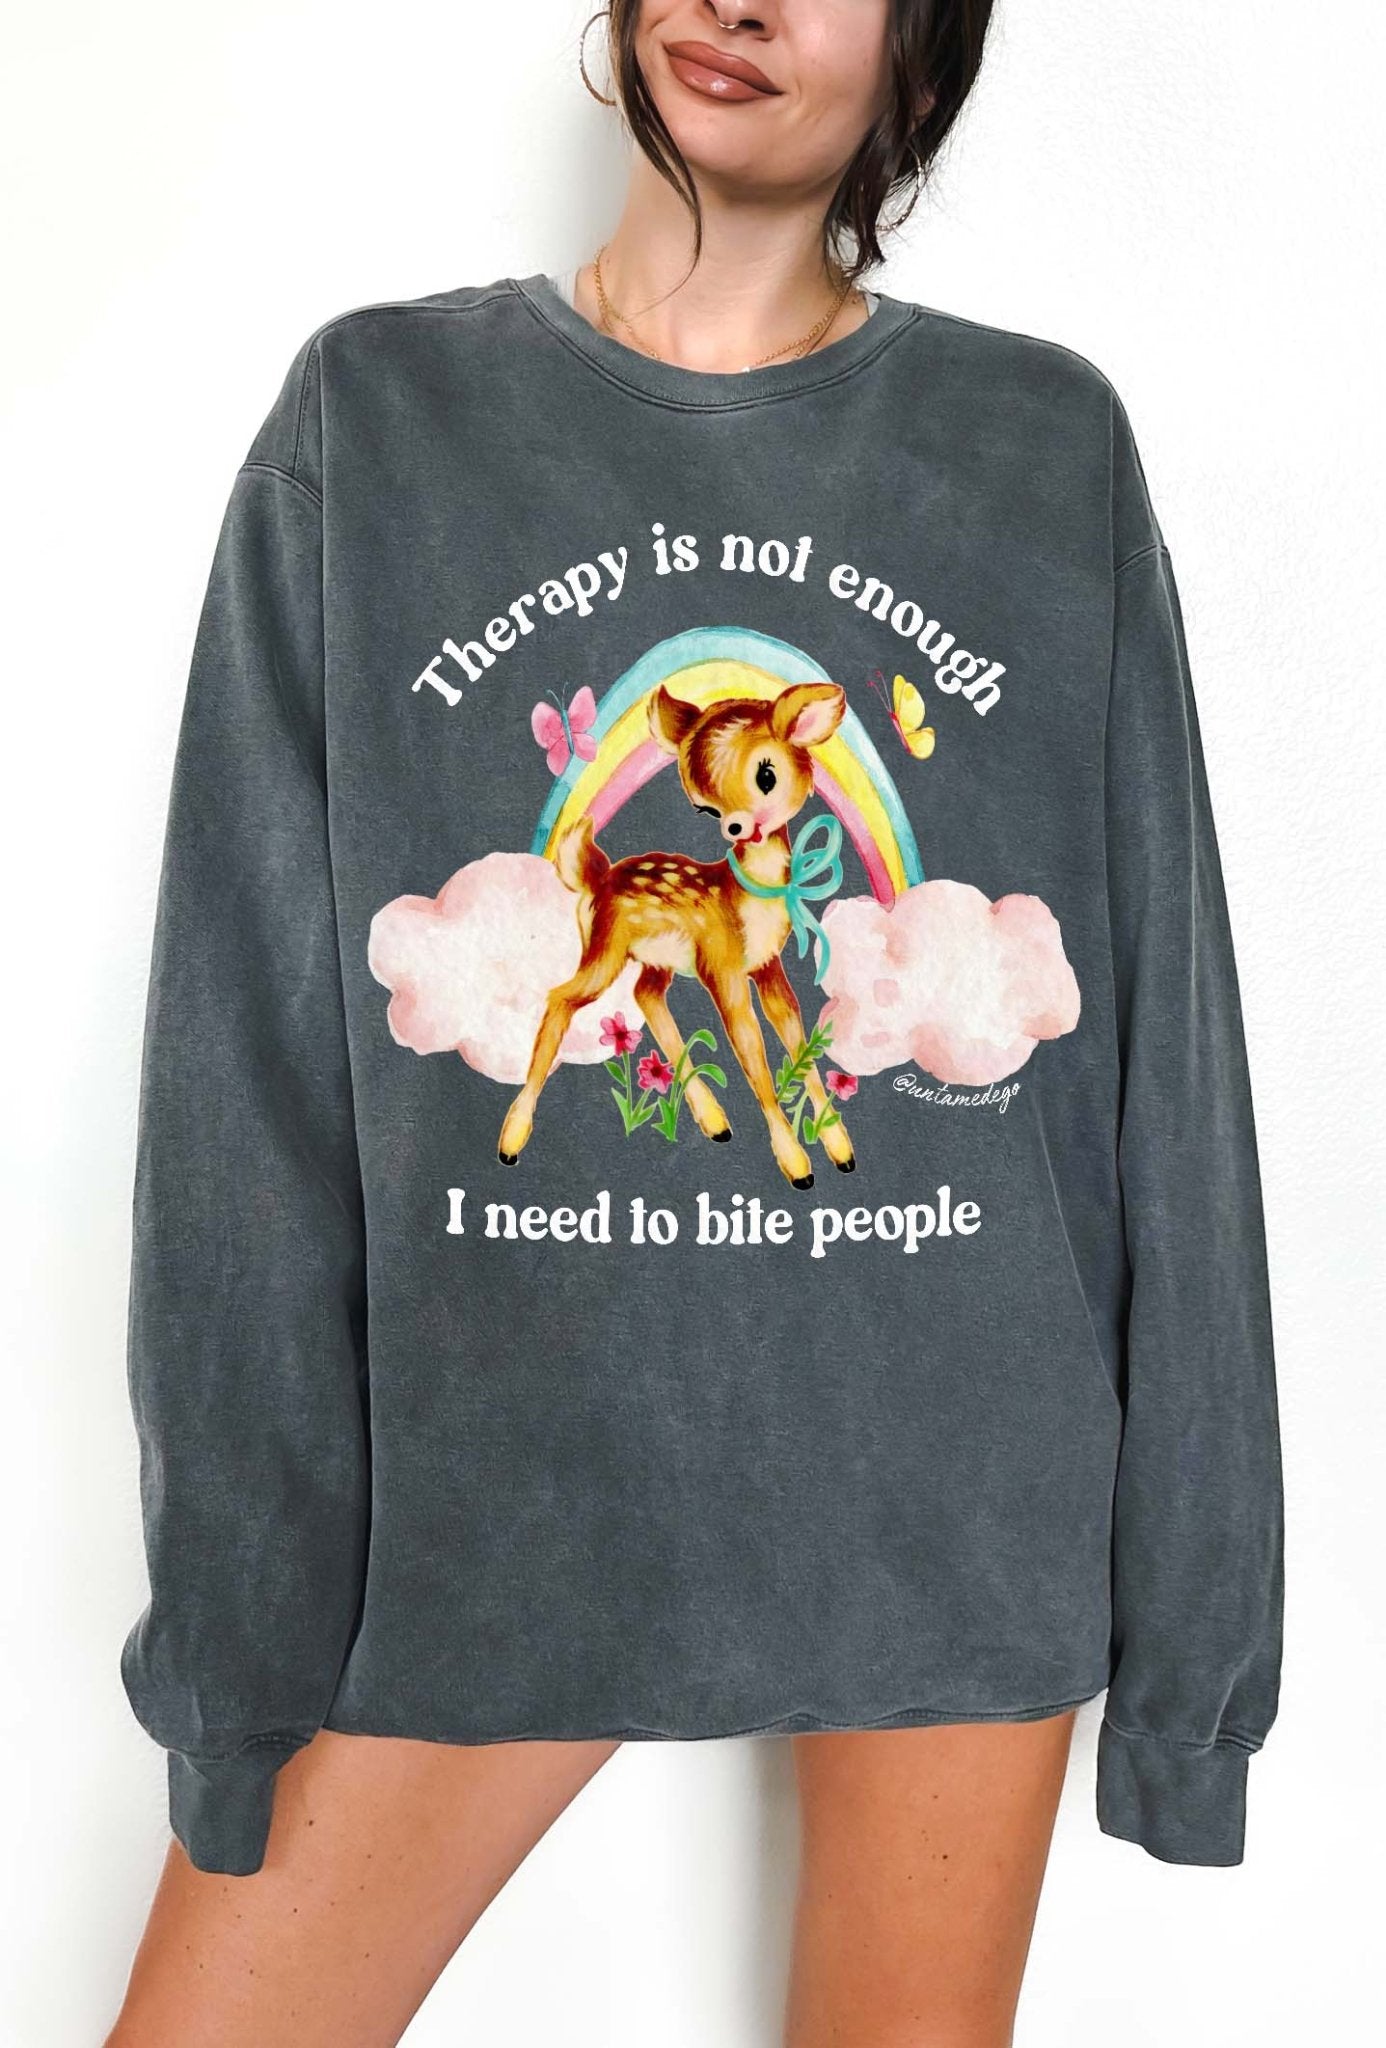 Therapy Is Not Enough Enough I Need To Bite People Crew Deer Sweatshirt - UntamedEgo LLC.